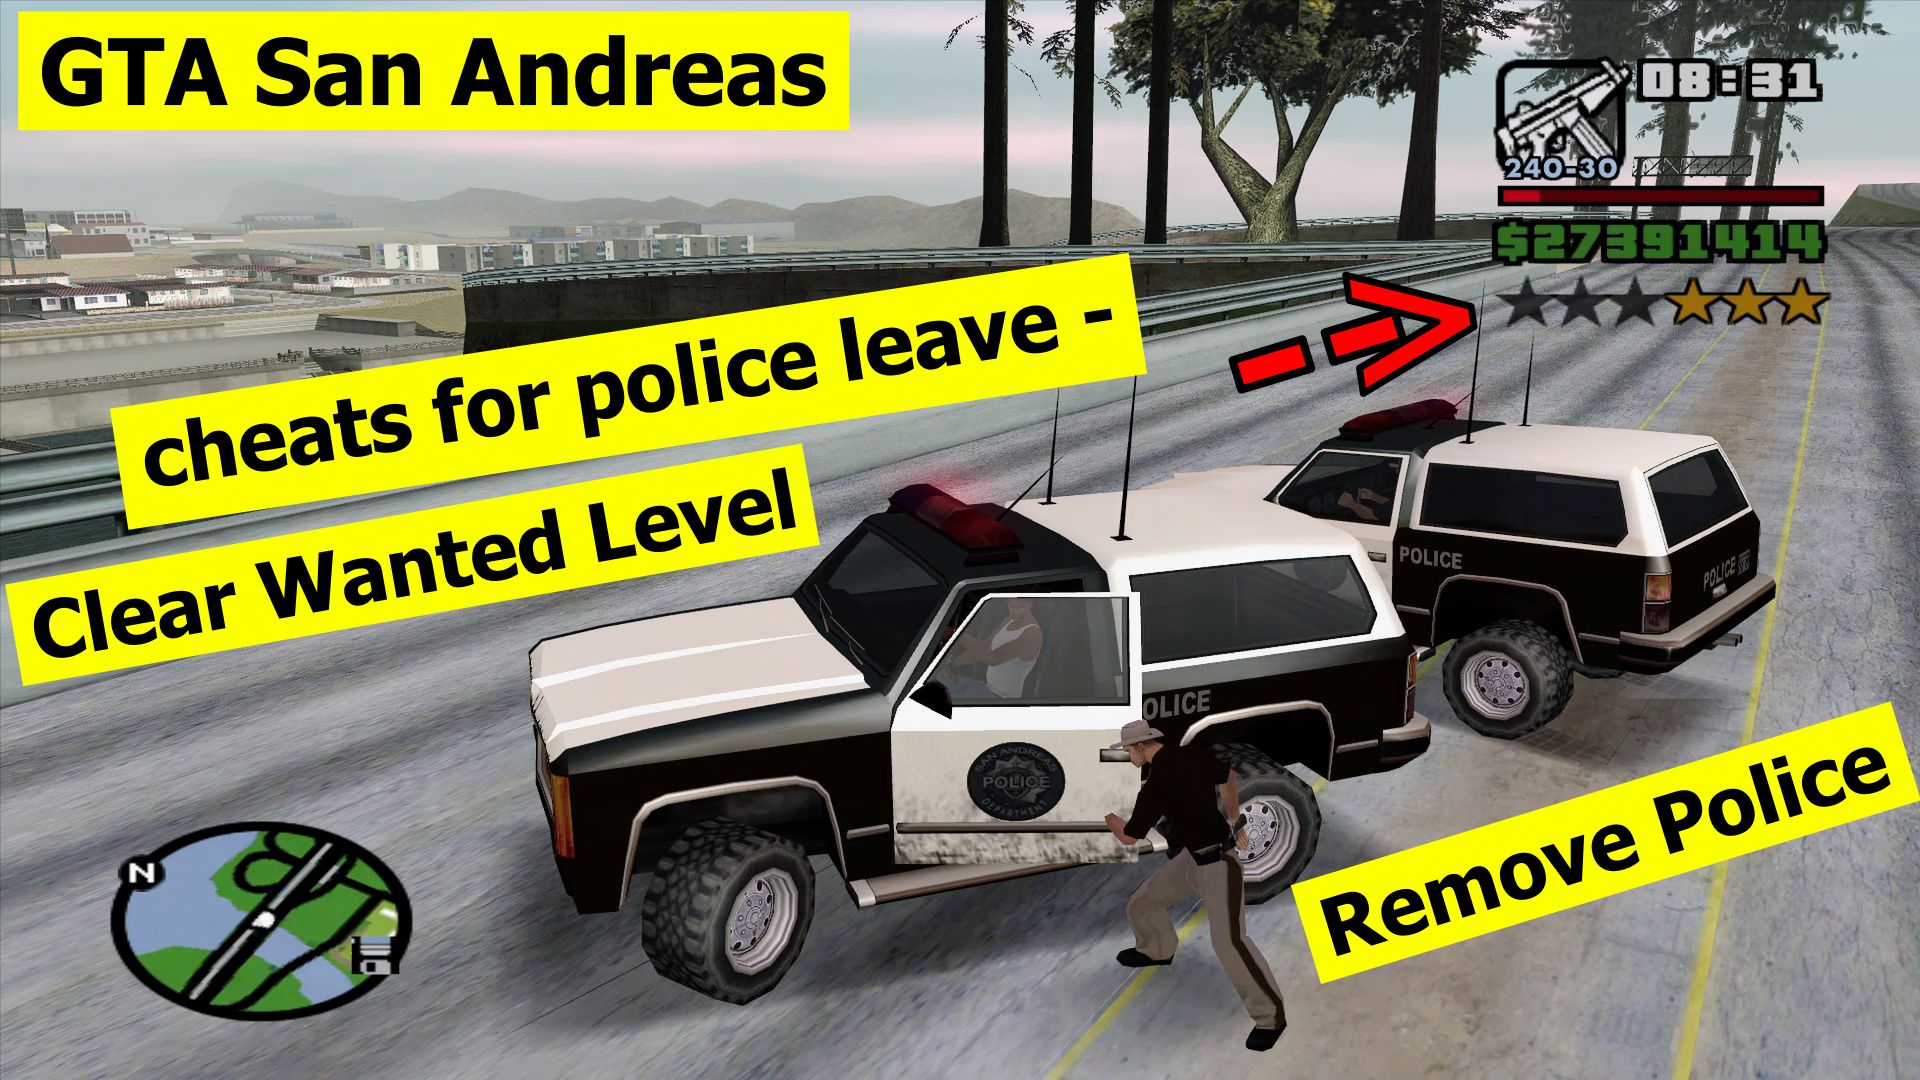 GTA San Andreas cheats police leave - Remove Police, Clear Wanted Level